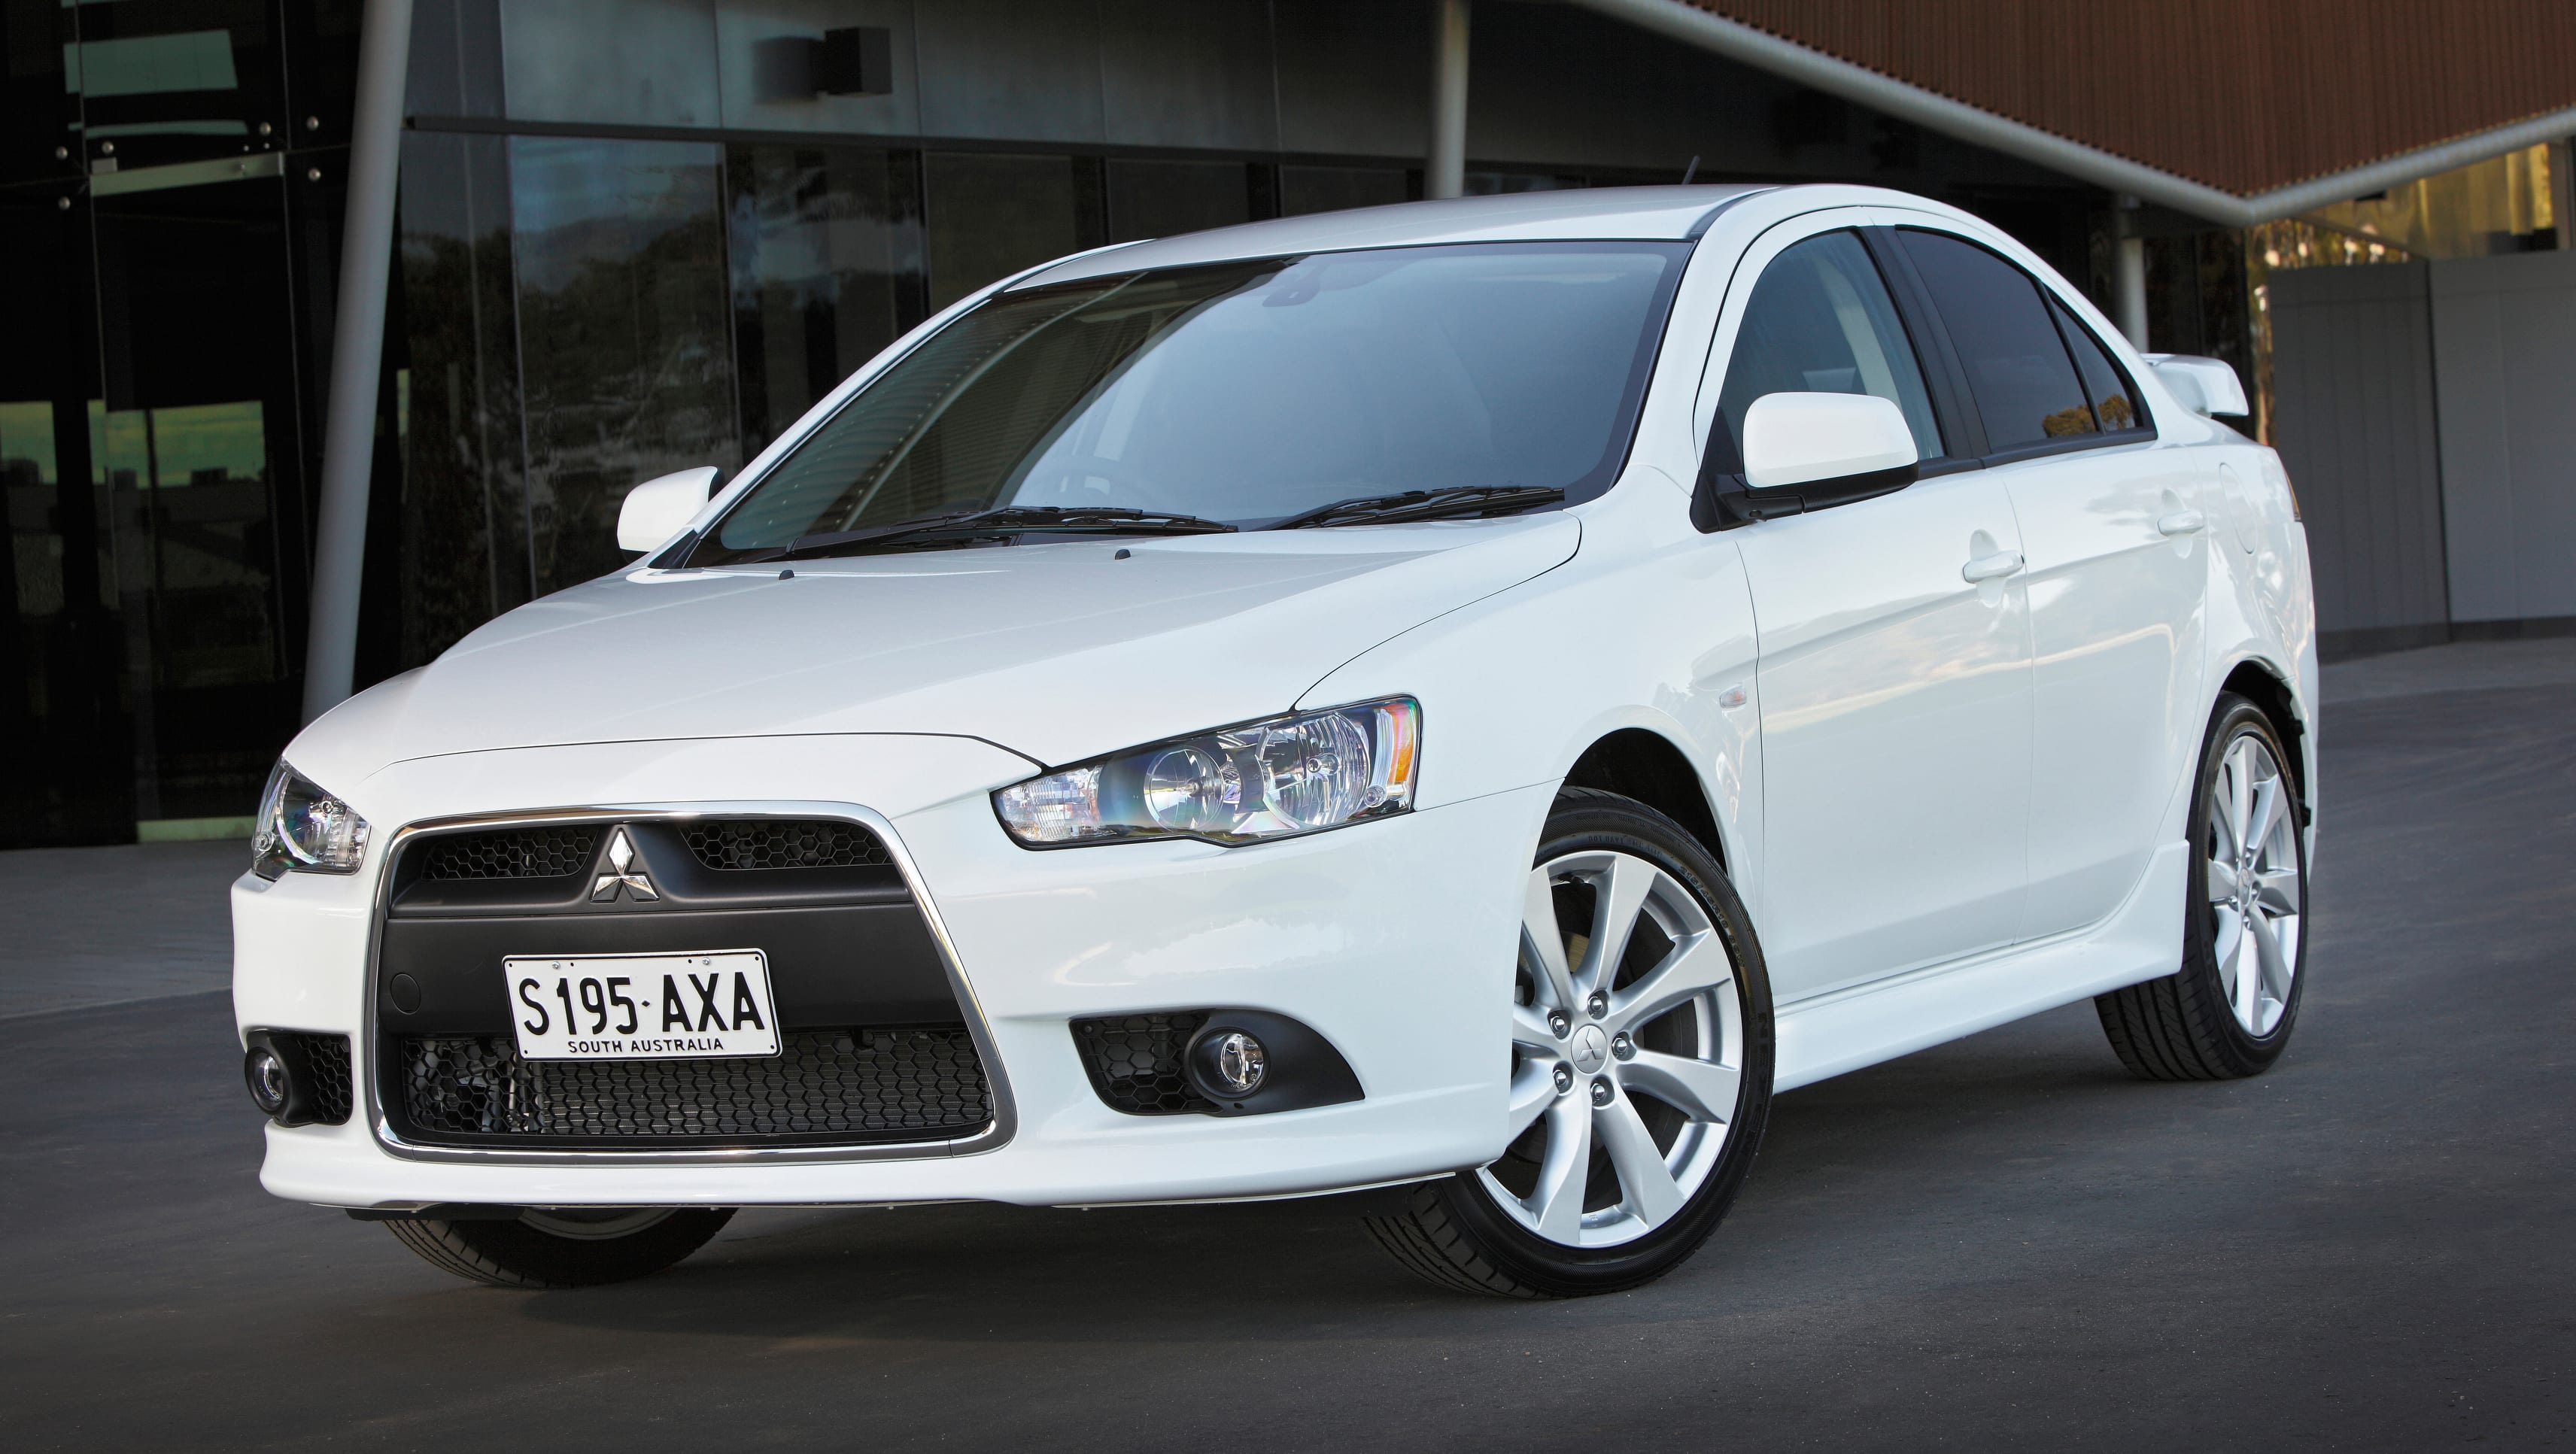 Used Mitsubishi Lancer review 20072018 CarsGuide